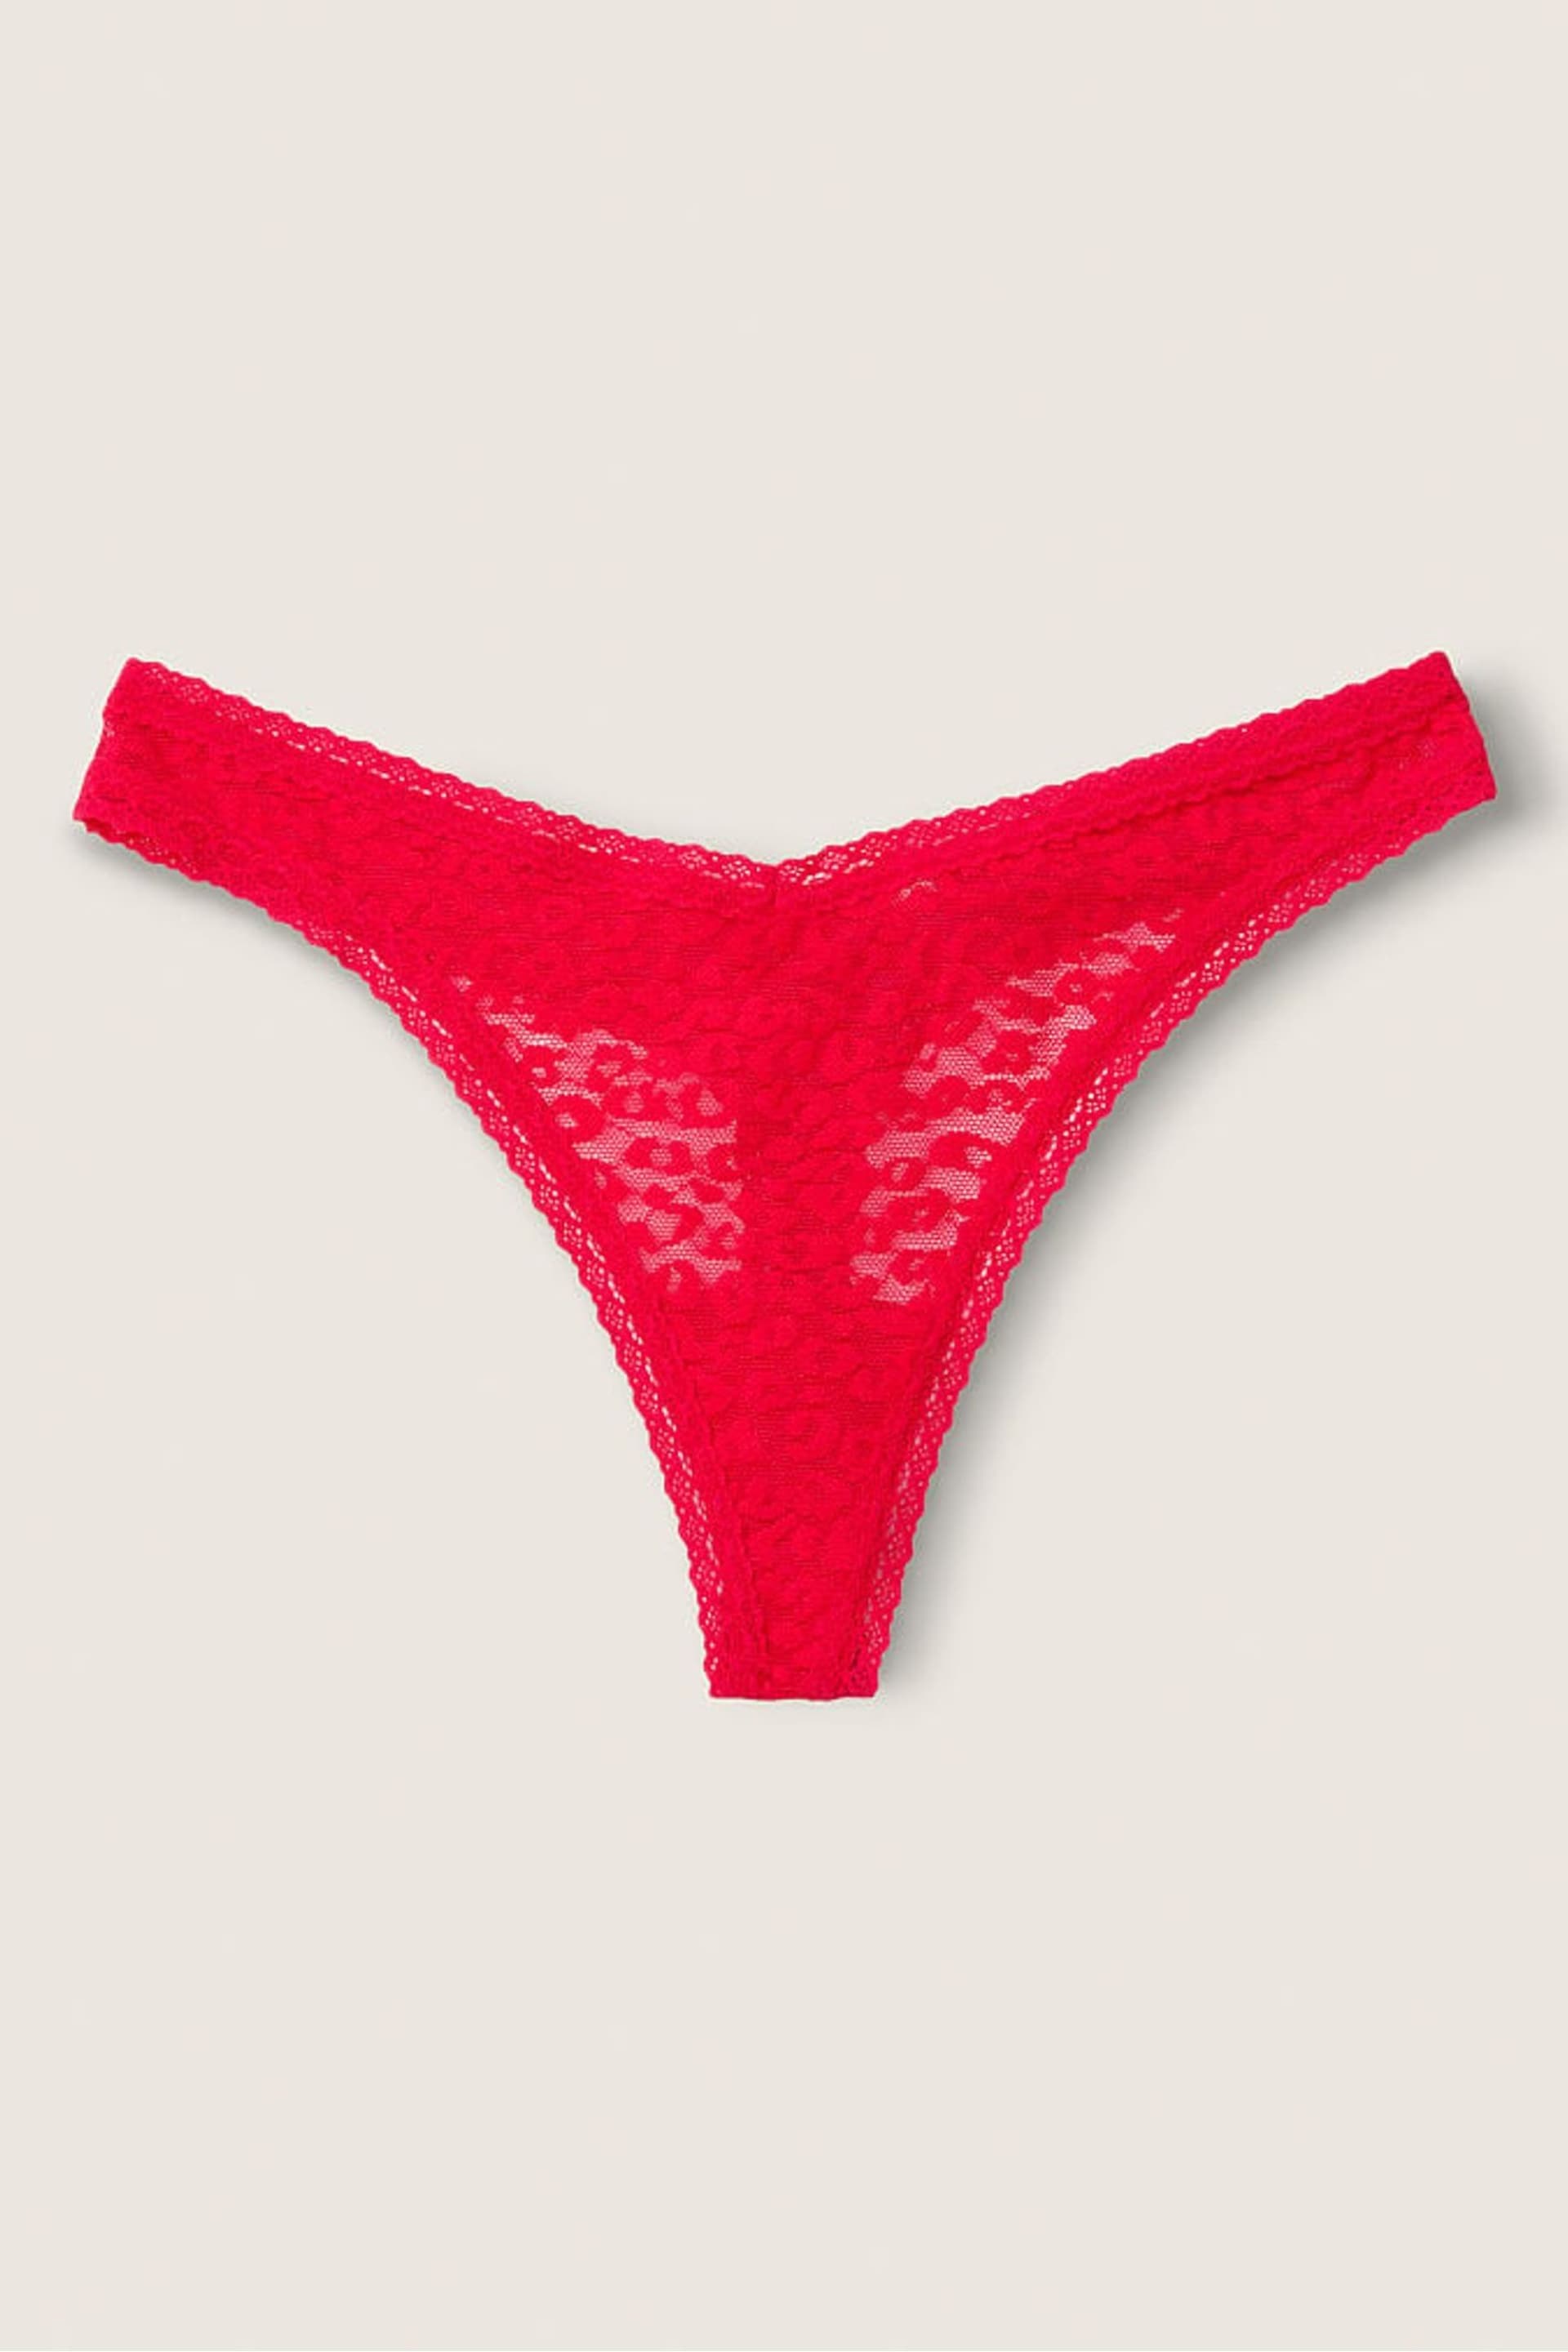 Victoria's Secret PINK Red Pepper Lace Logo Thong Knickers - Image 1 of 2